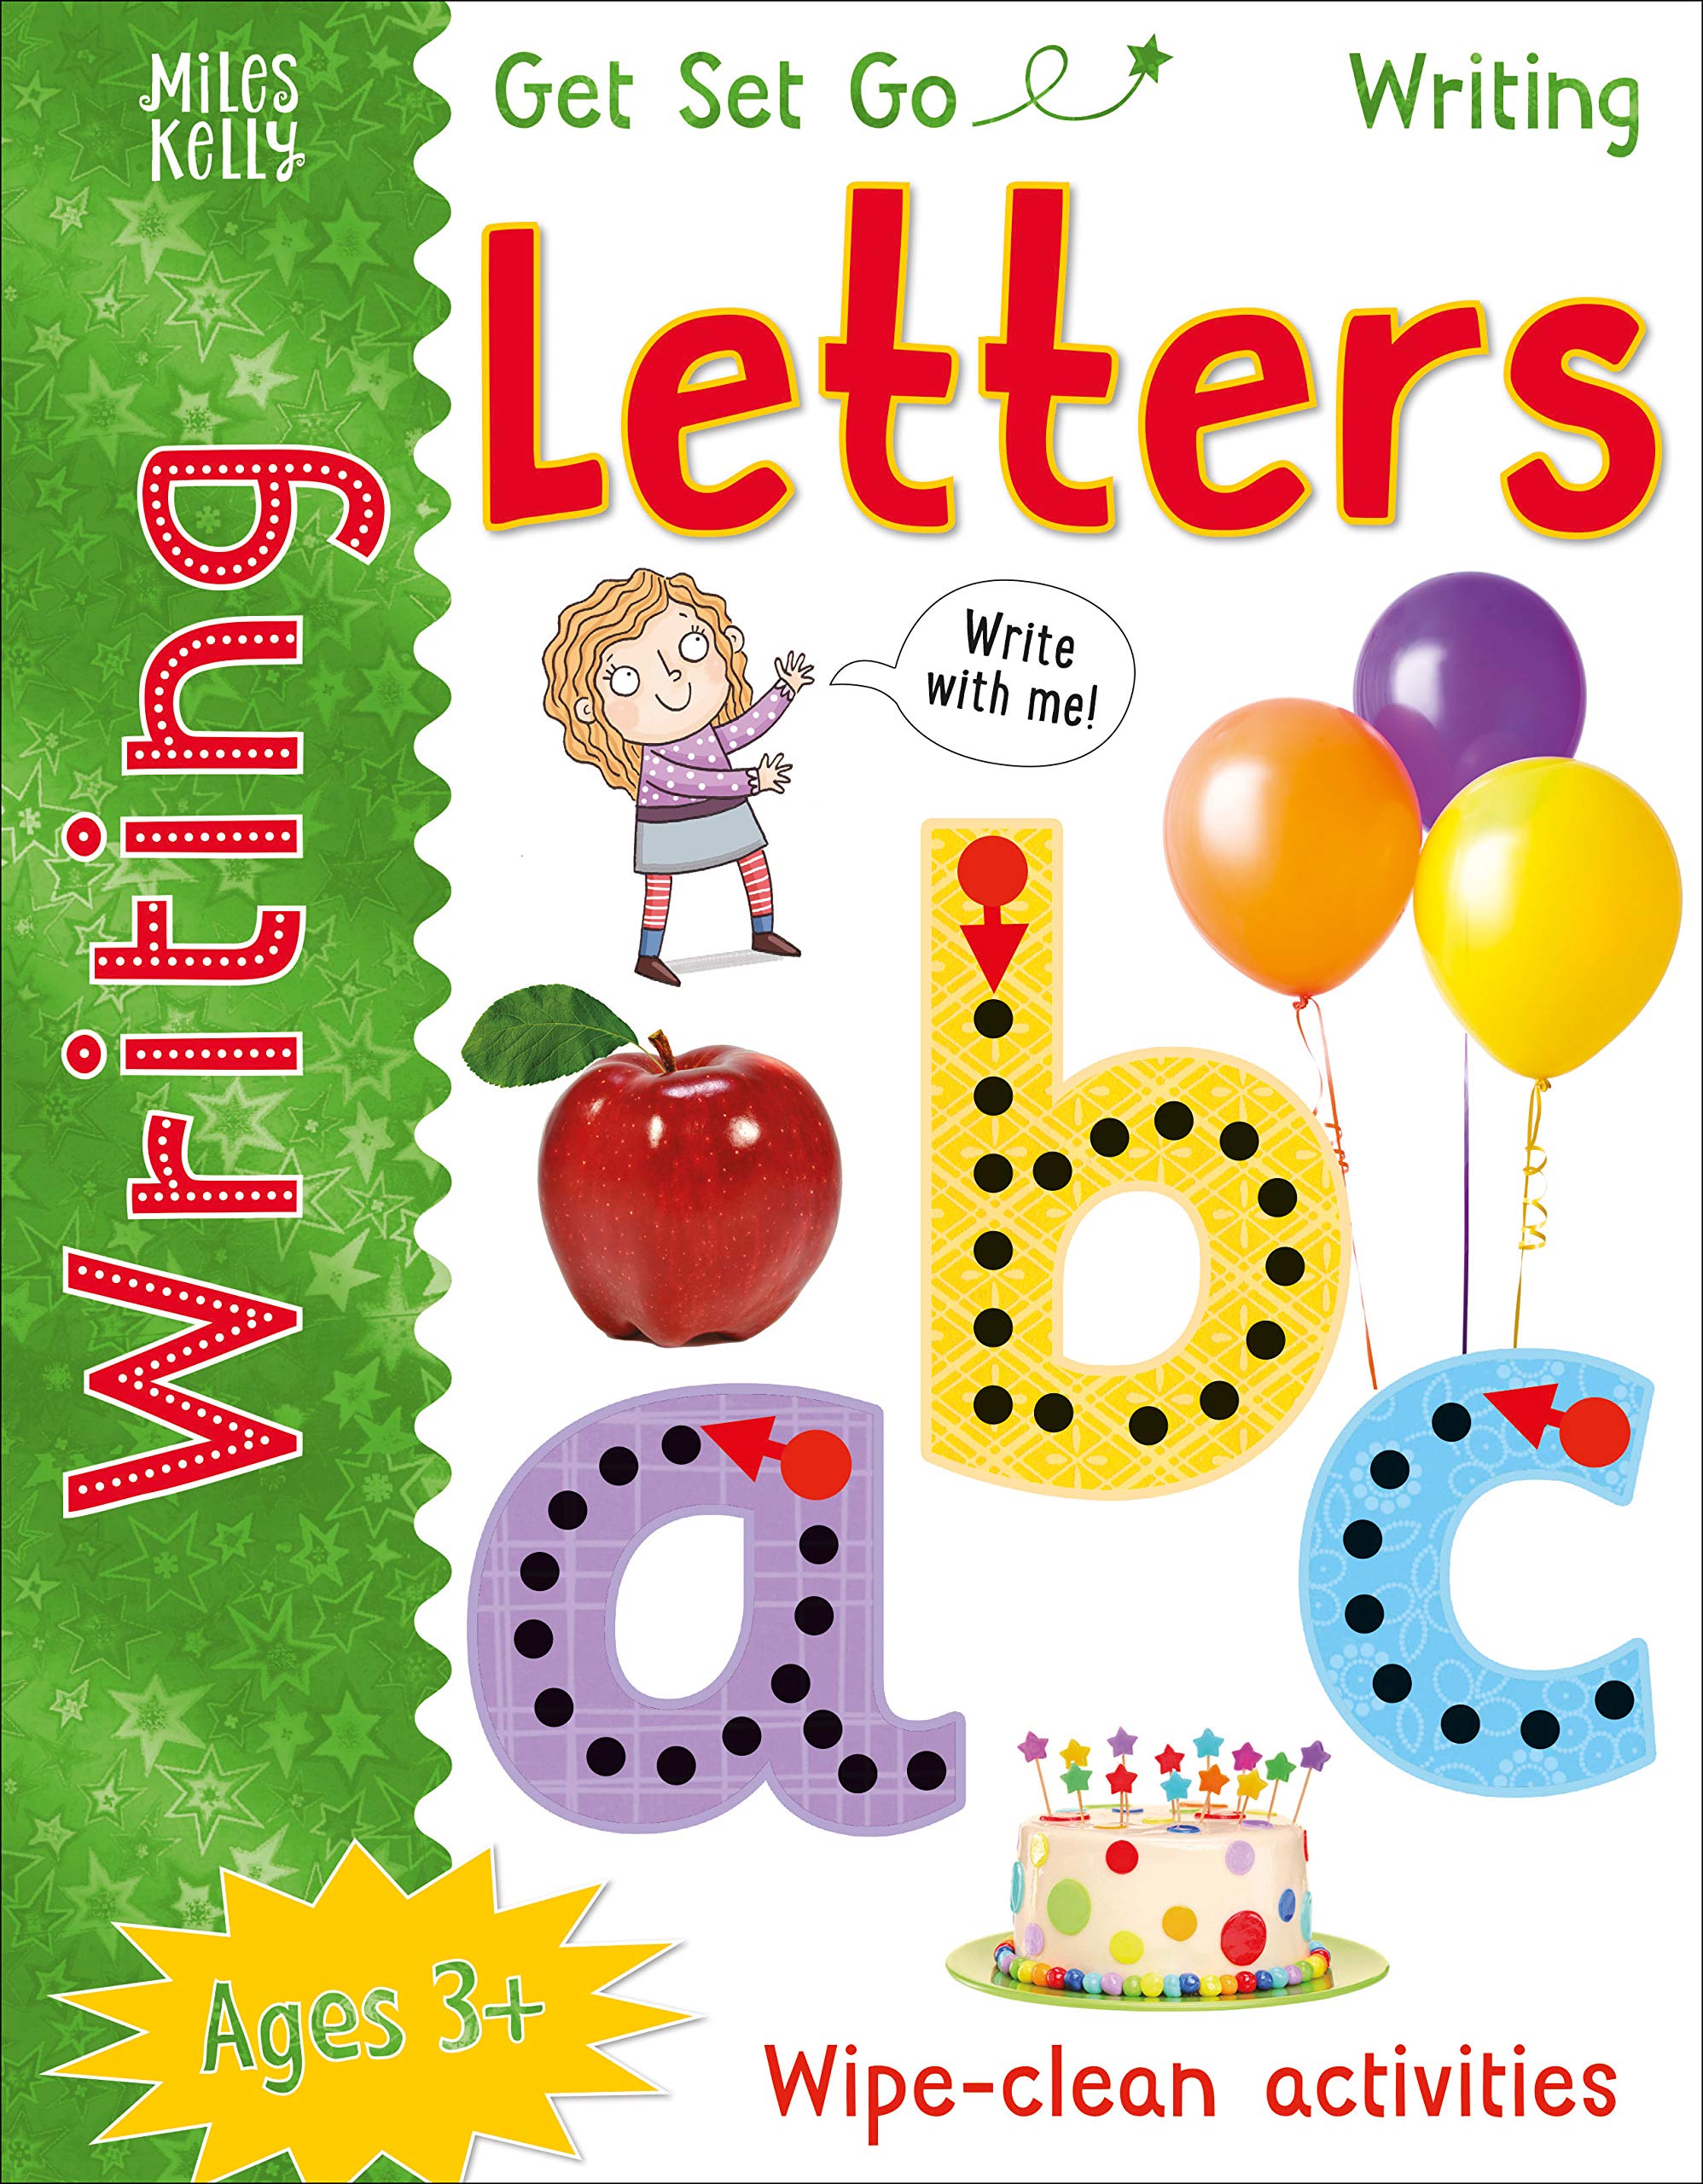 GSG WRITING LETTERS (GET SET GO WRITING)